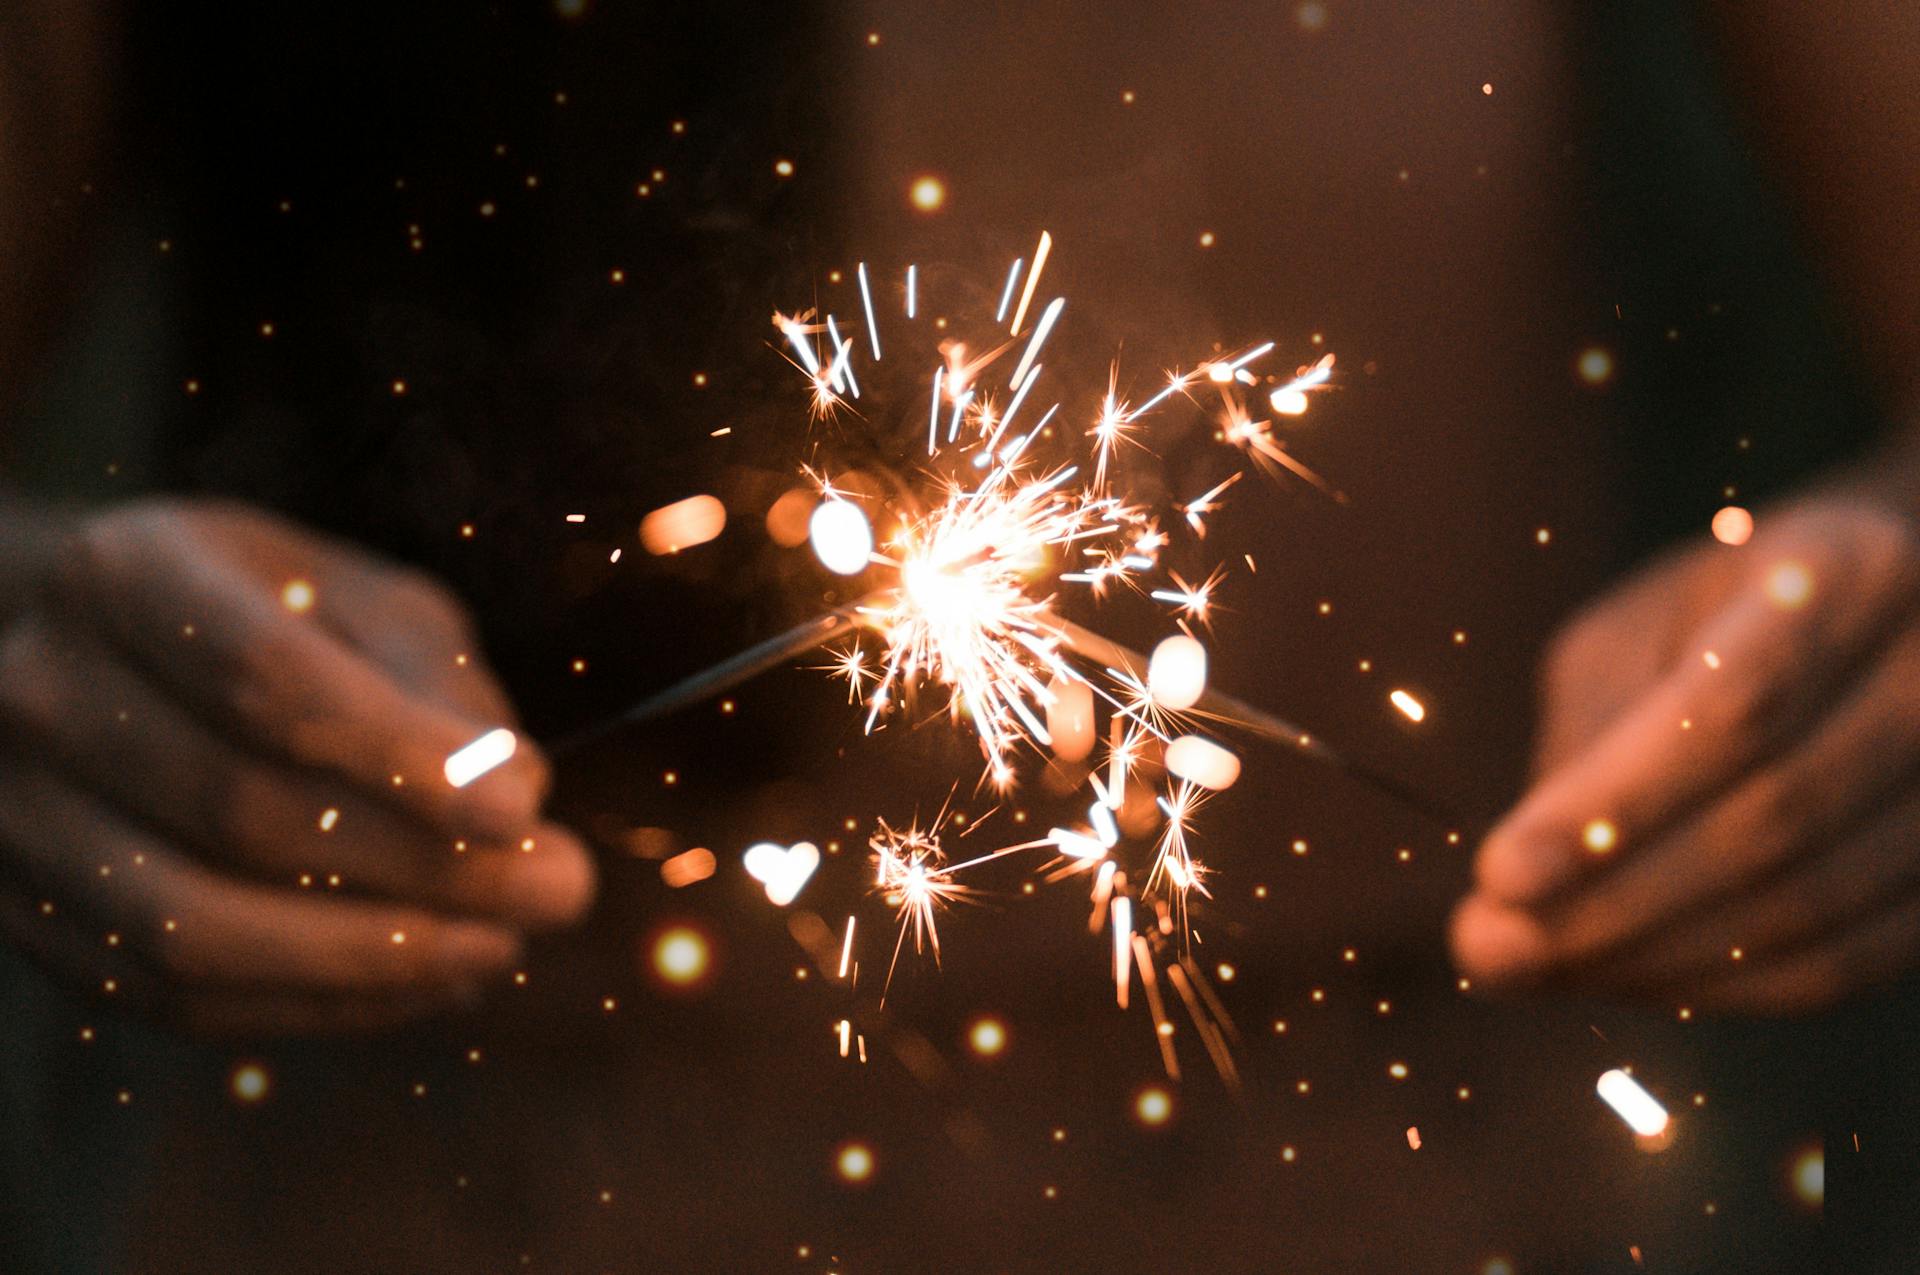 Person holding Sparklers